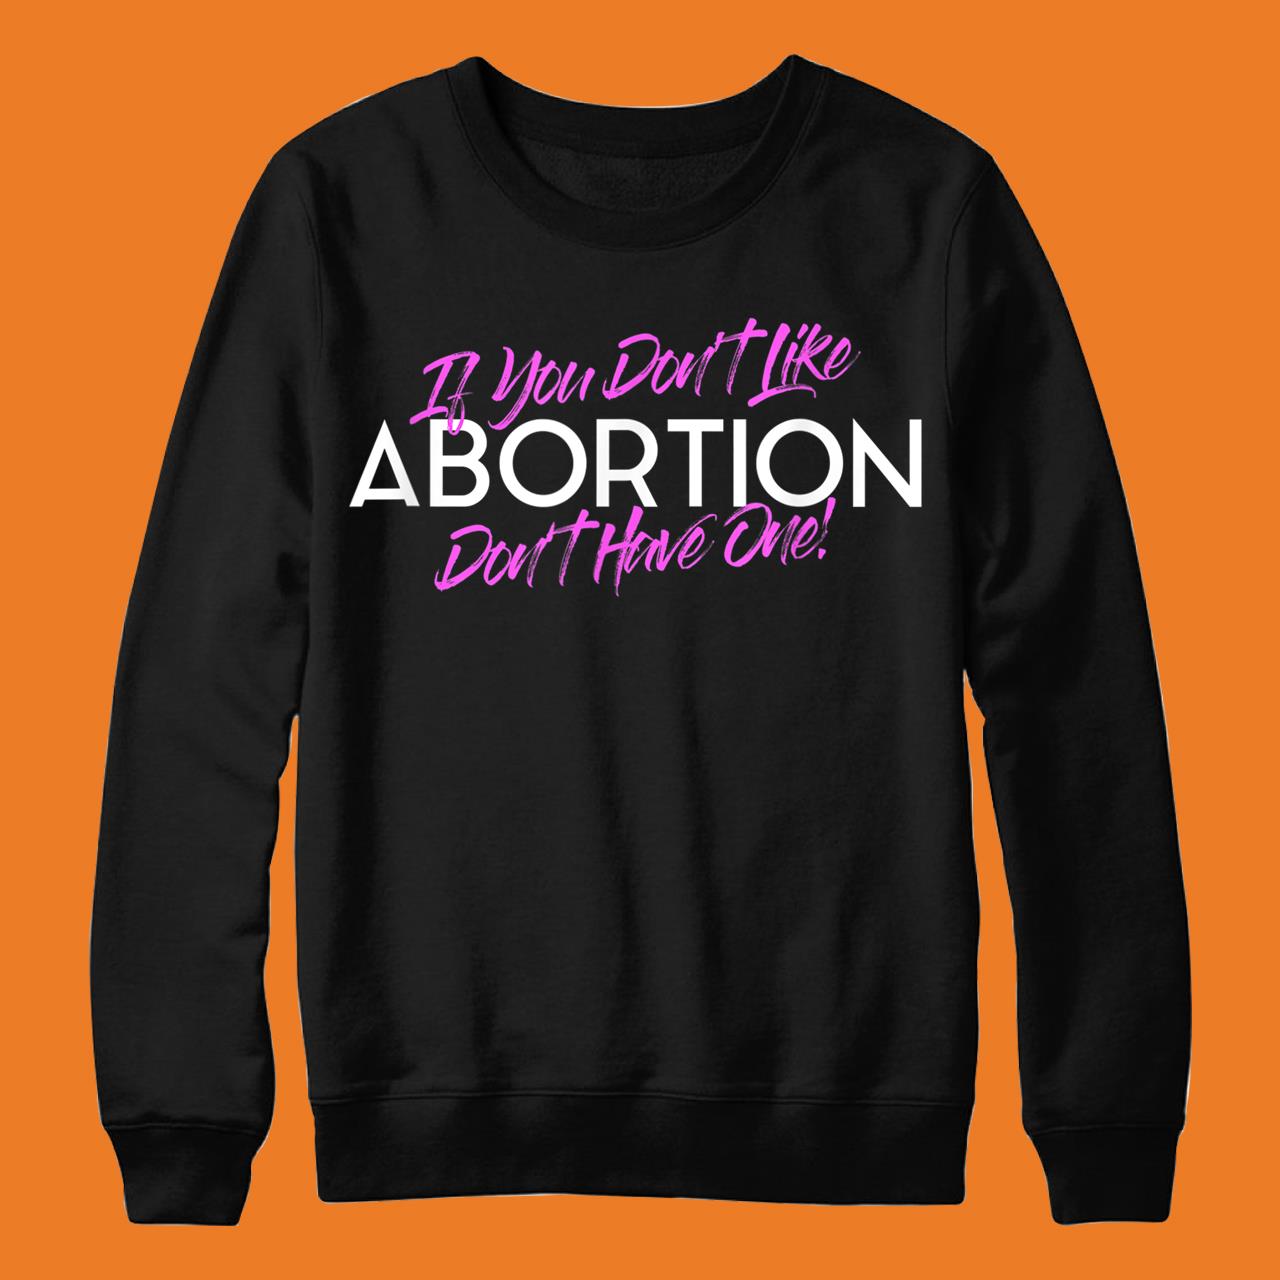 If You Don’t Like Abortion Don’t Have One – Pro Choice T-Shirt